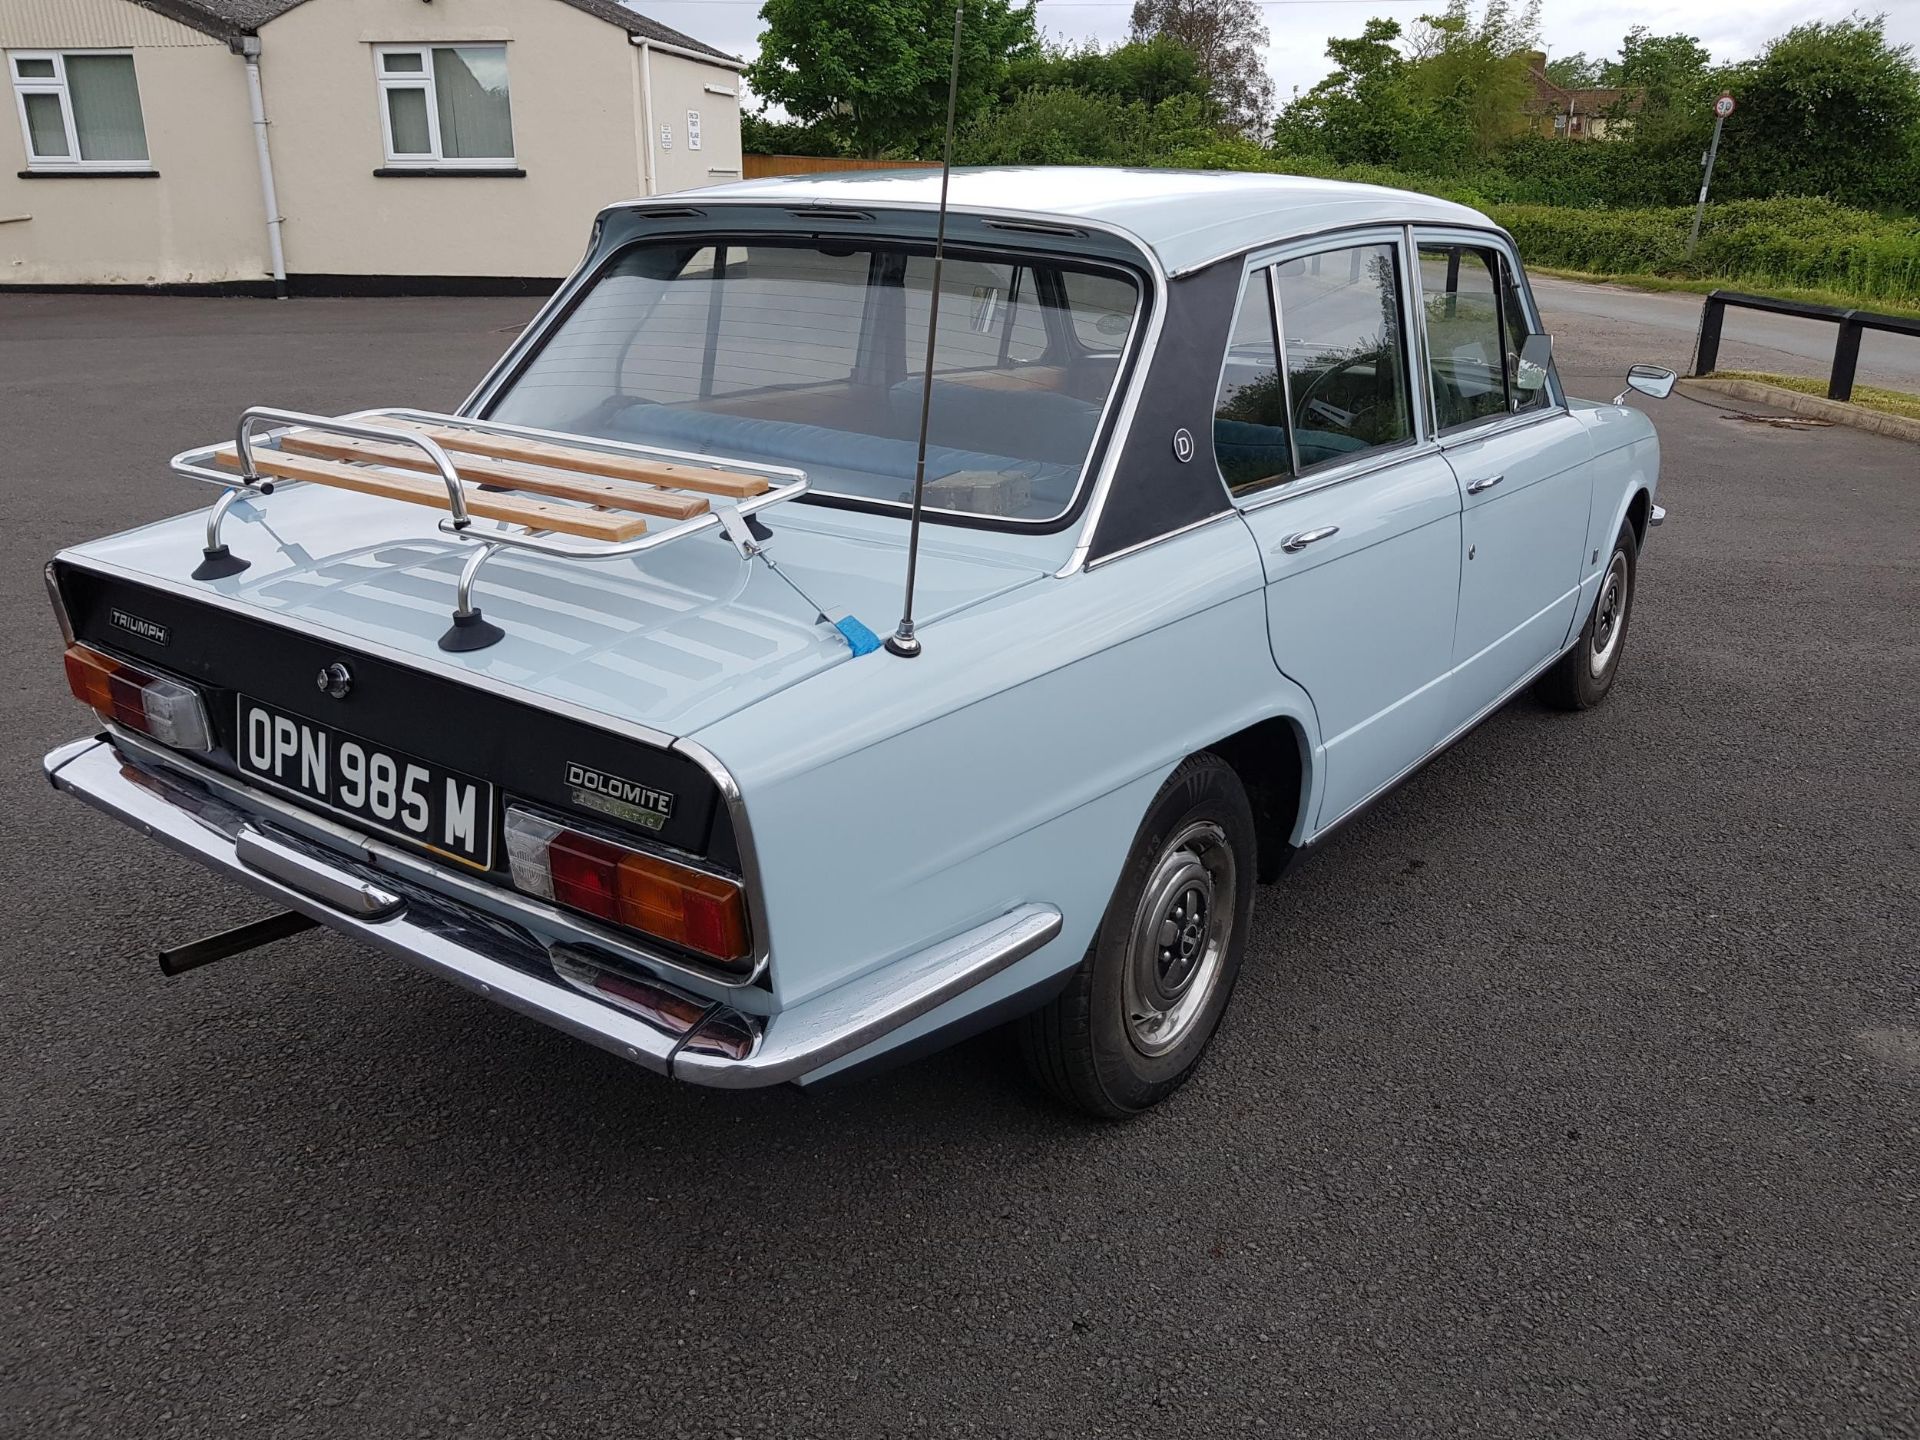 1974 Triumph Dolomite 1850 Registration number OPN 985M Light French blue with blue cloth interior - Image 5 of 14